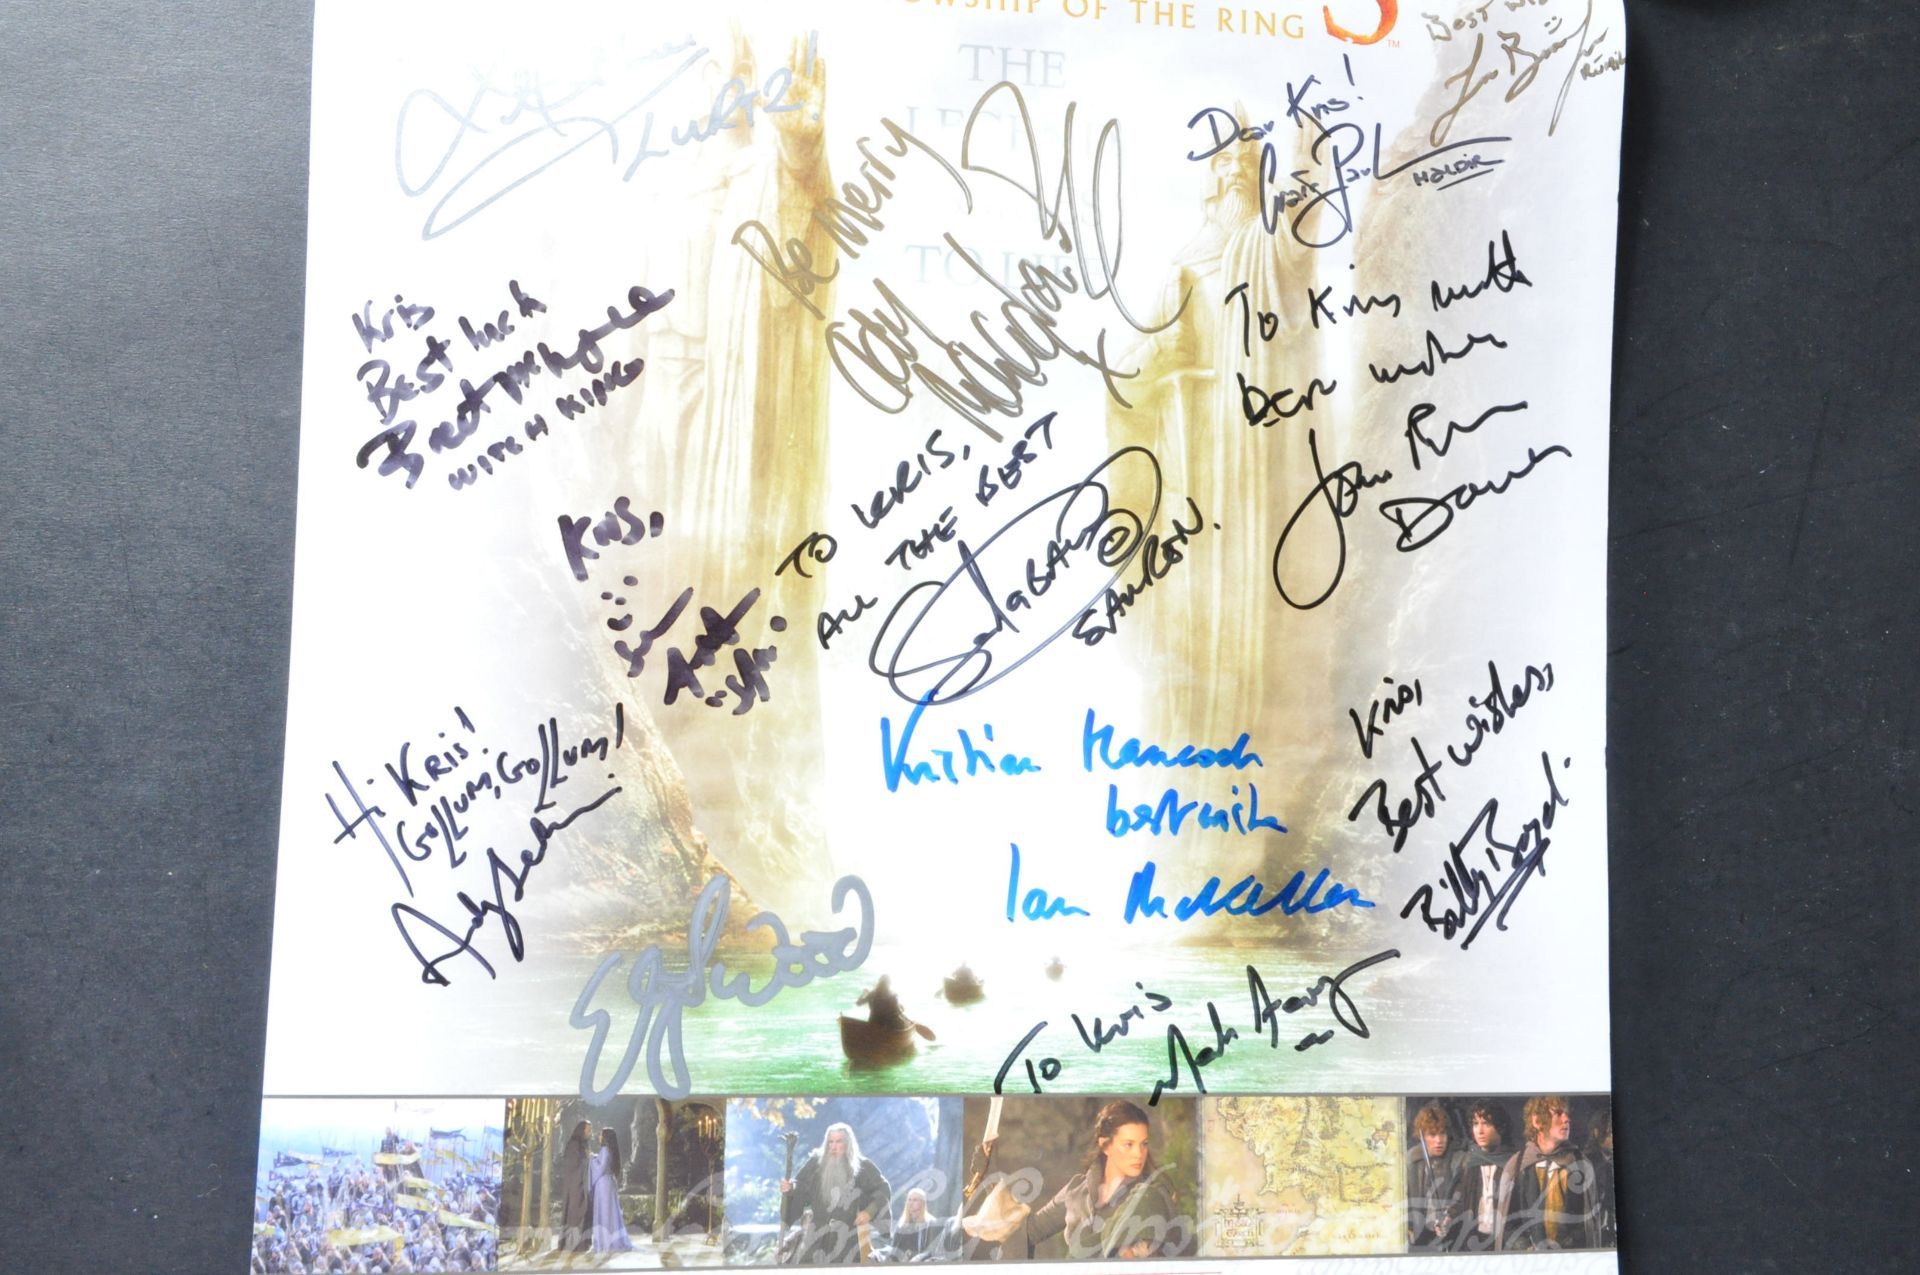 THE LORD OF THE RINGS - CAST SIGNED MINIPOSTER - SERKIS, WOOD, MCKELLEN ETC - Image 3 of 3